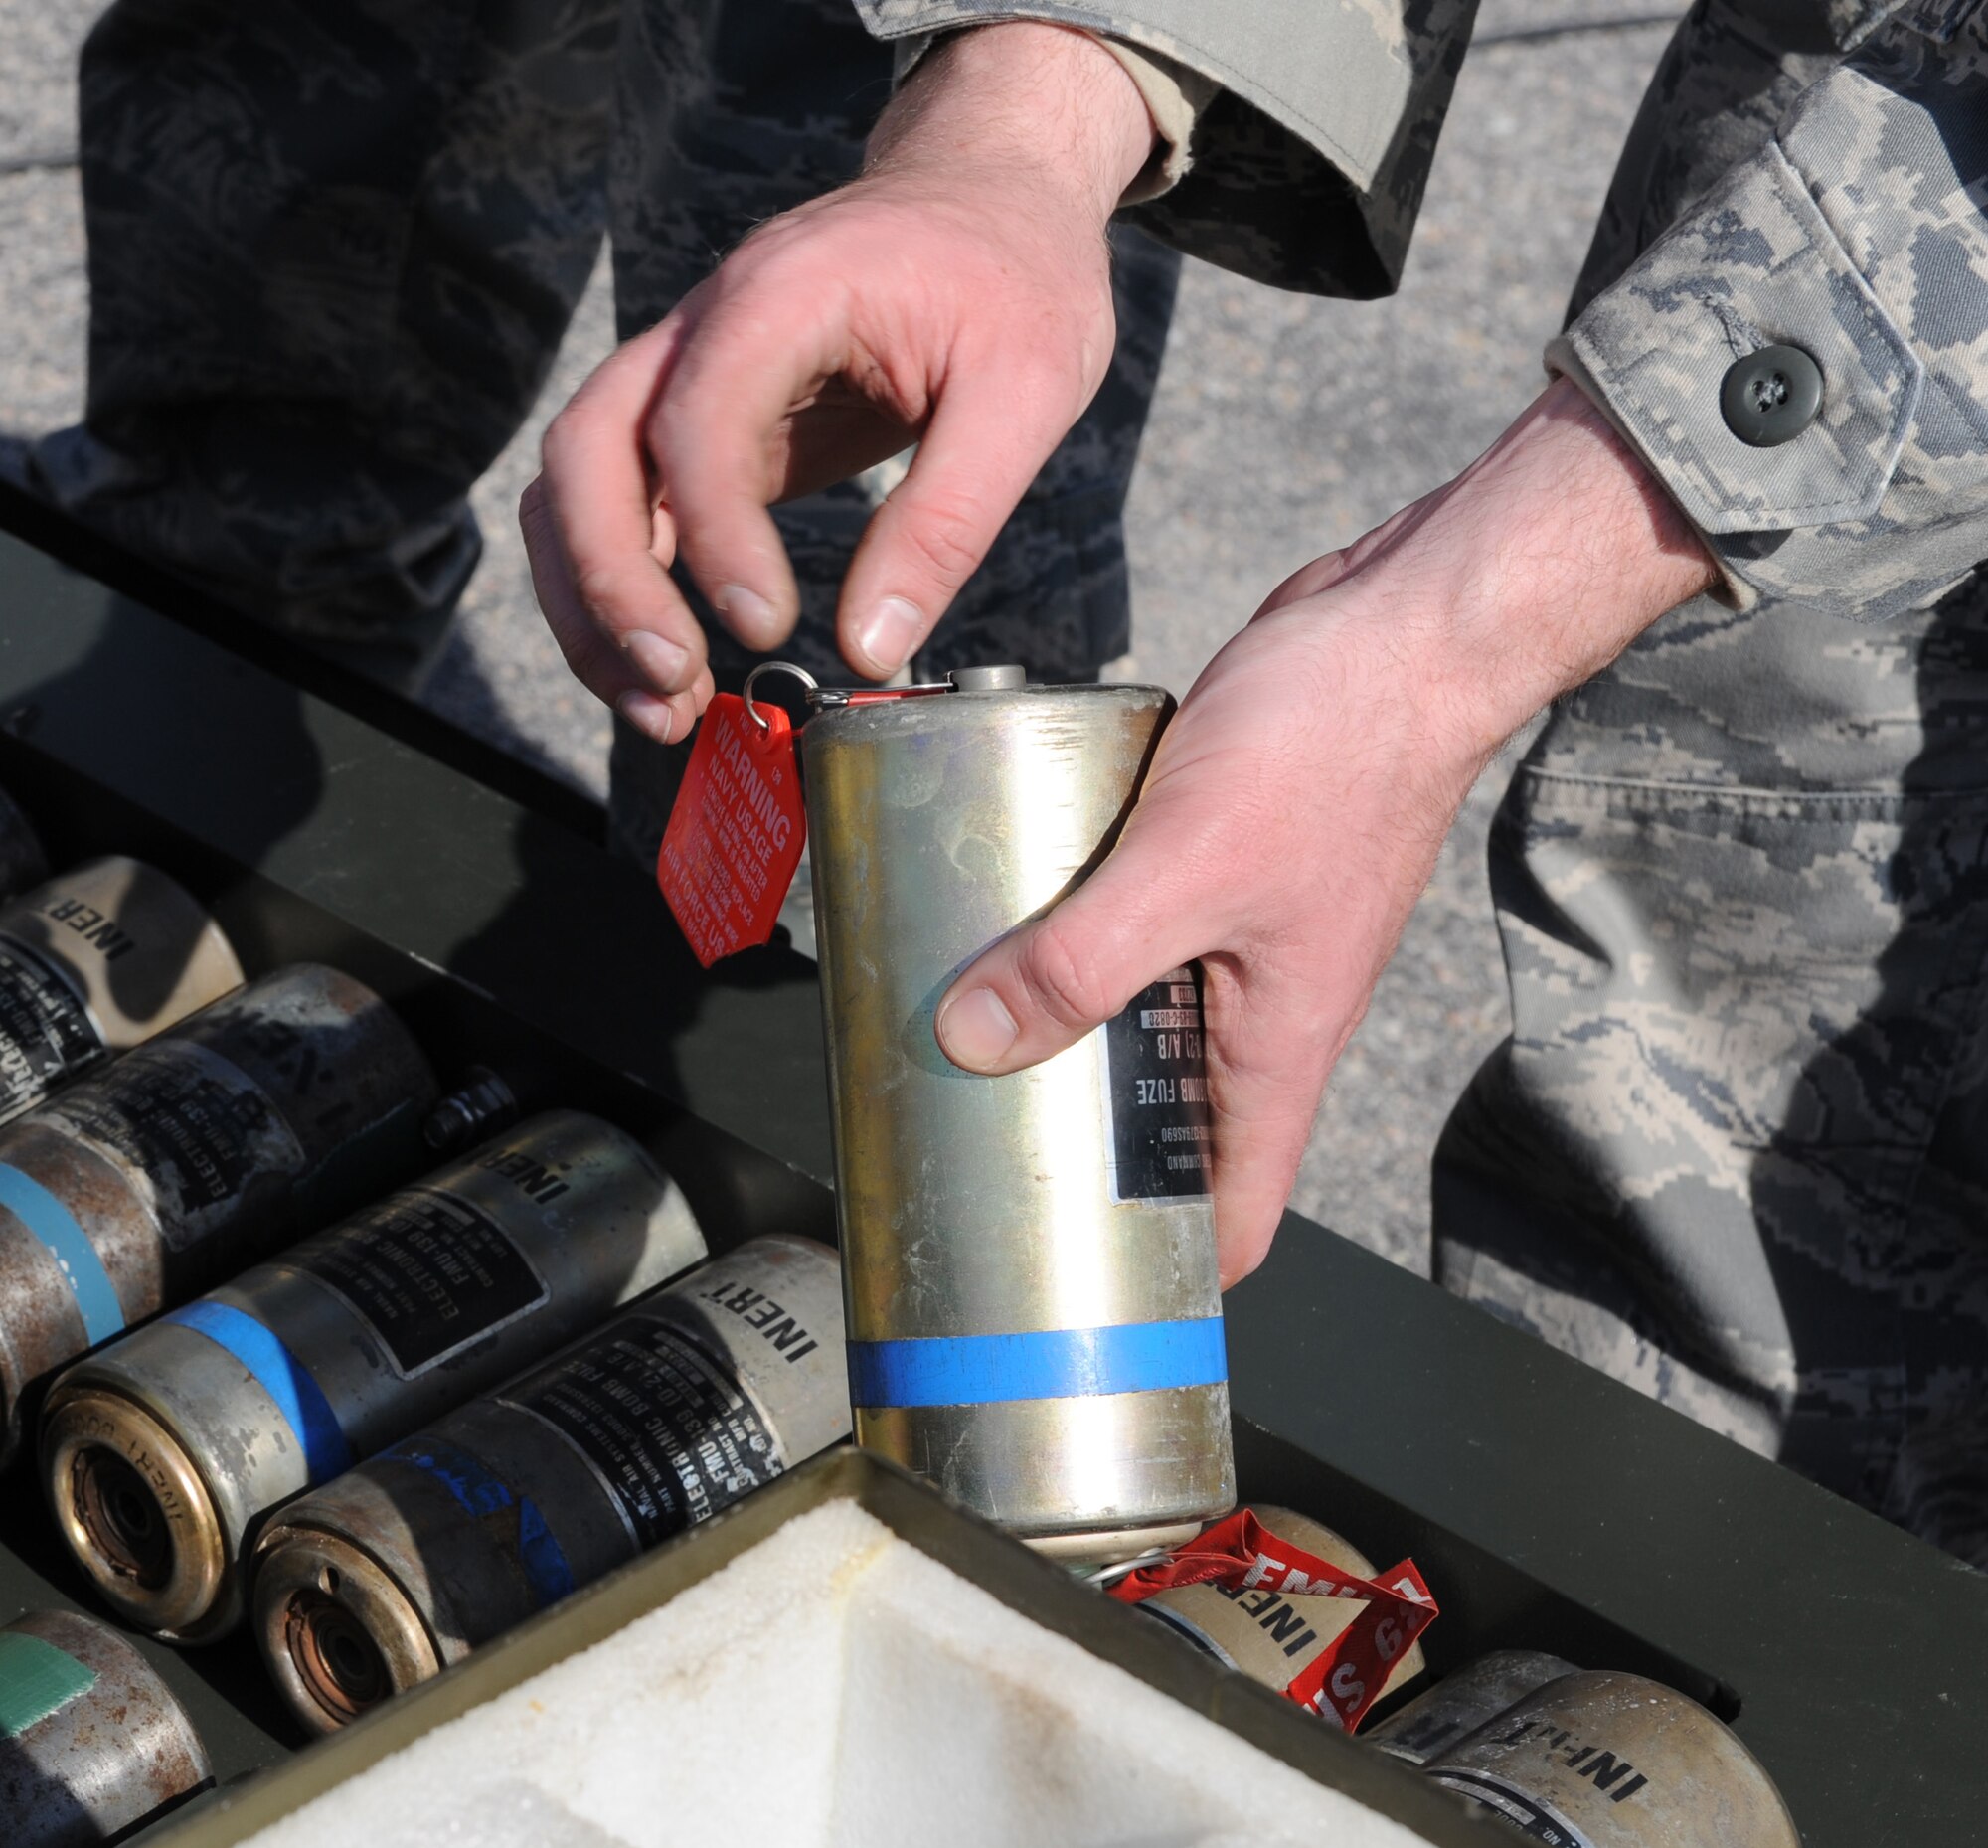 Staff Sgt. Kevin Johnson, 4th Equipment Maintenance Squadron conventional maintenance technician, inspects a GBU-38 training bomb fuse during a bomb build on Seymour Johnson Air Force Base, N.C., March 24, 2010. Airmen build training bombs periodically to maintain their proficiency for future deployments where they will deal with live munitions. Johnson hails from Fontana, Calif. (U.S. Air Force photo/Airman 1st Class Gino Reyes)